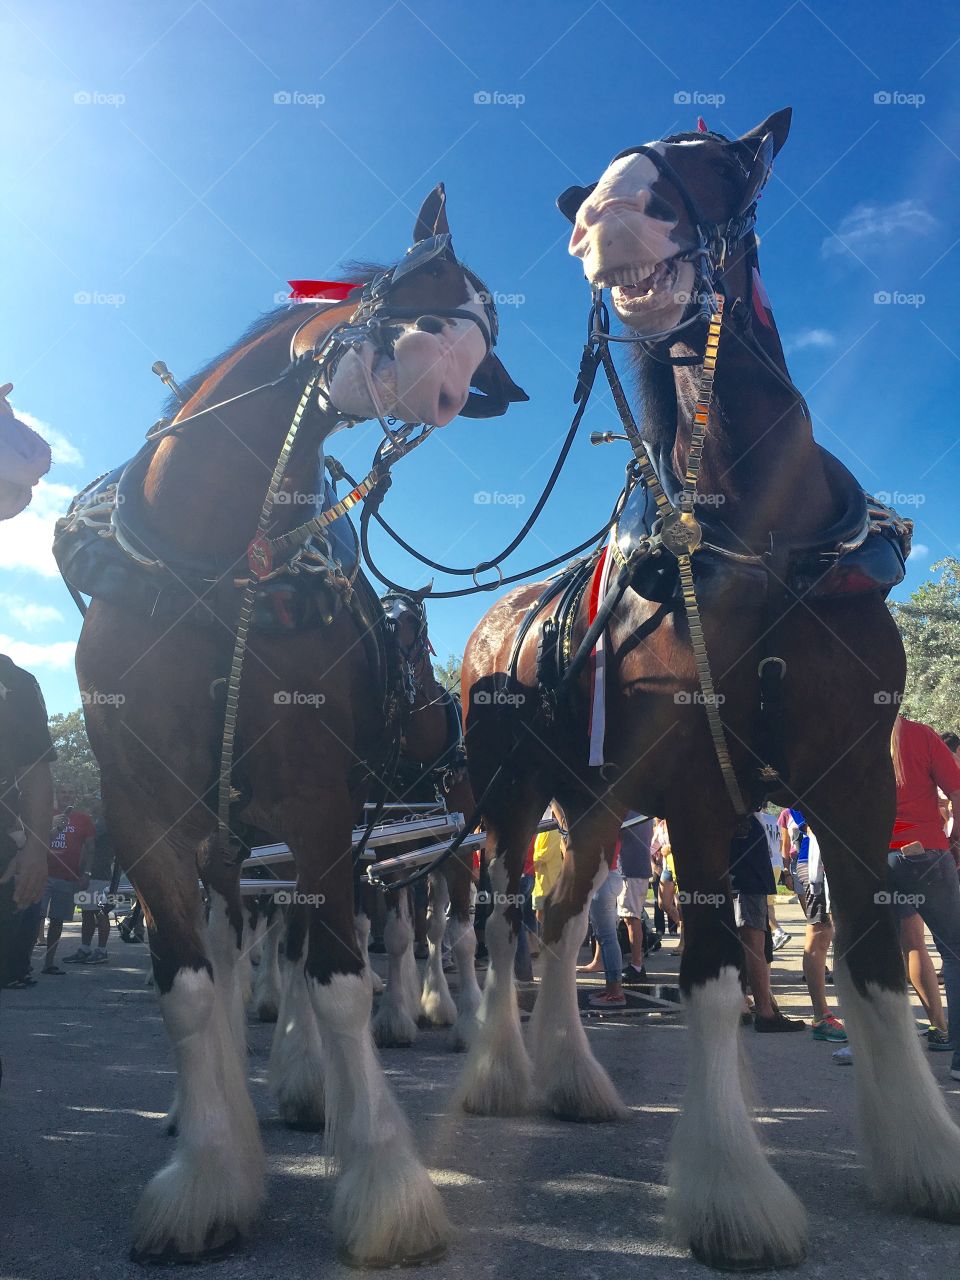 Clydesdale Budweiser horses